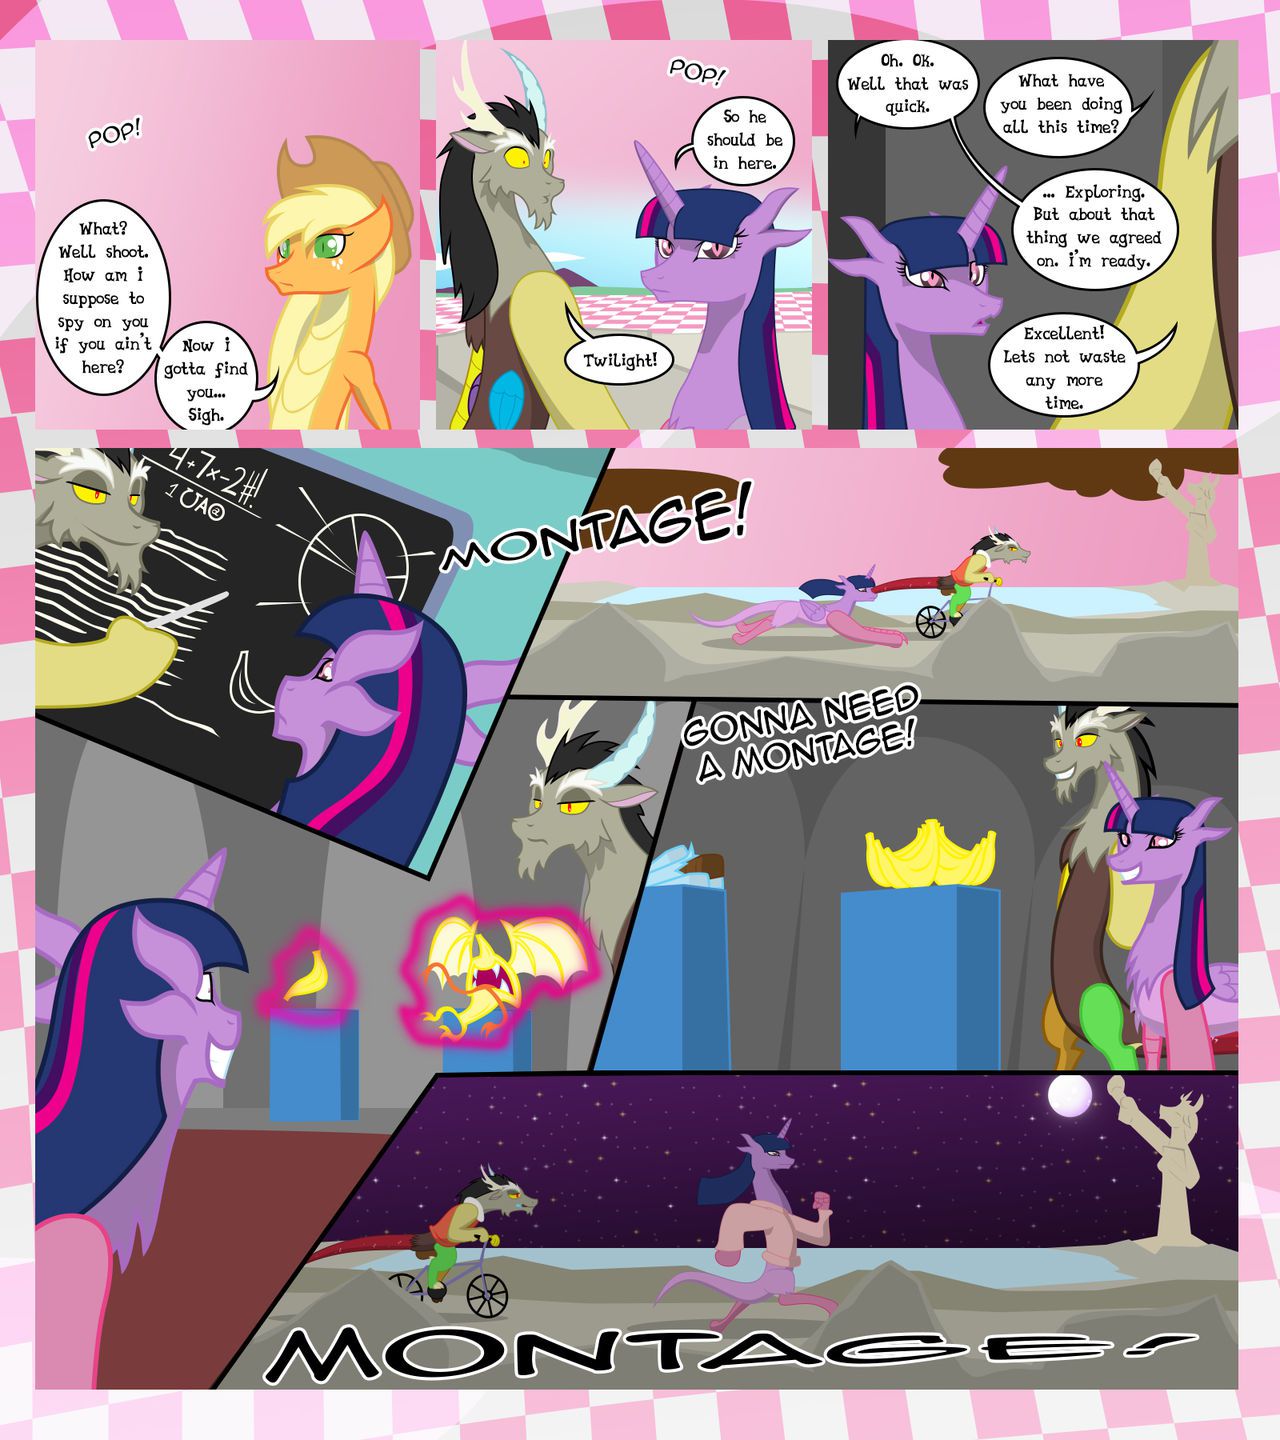 [GatesMcCloud] Cutie Mark Crusaders 10k: Chapter 3 - The Lost (My Little Pony: Friendship is Magic) [English] [Ongoing] 70